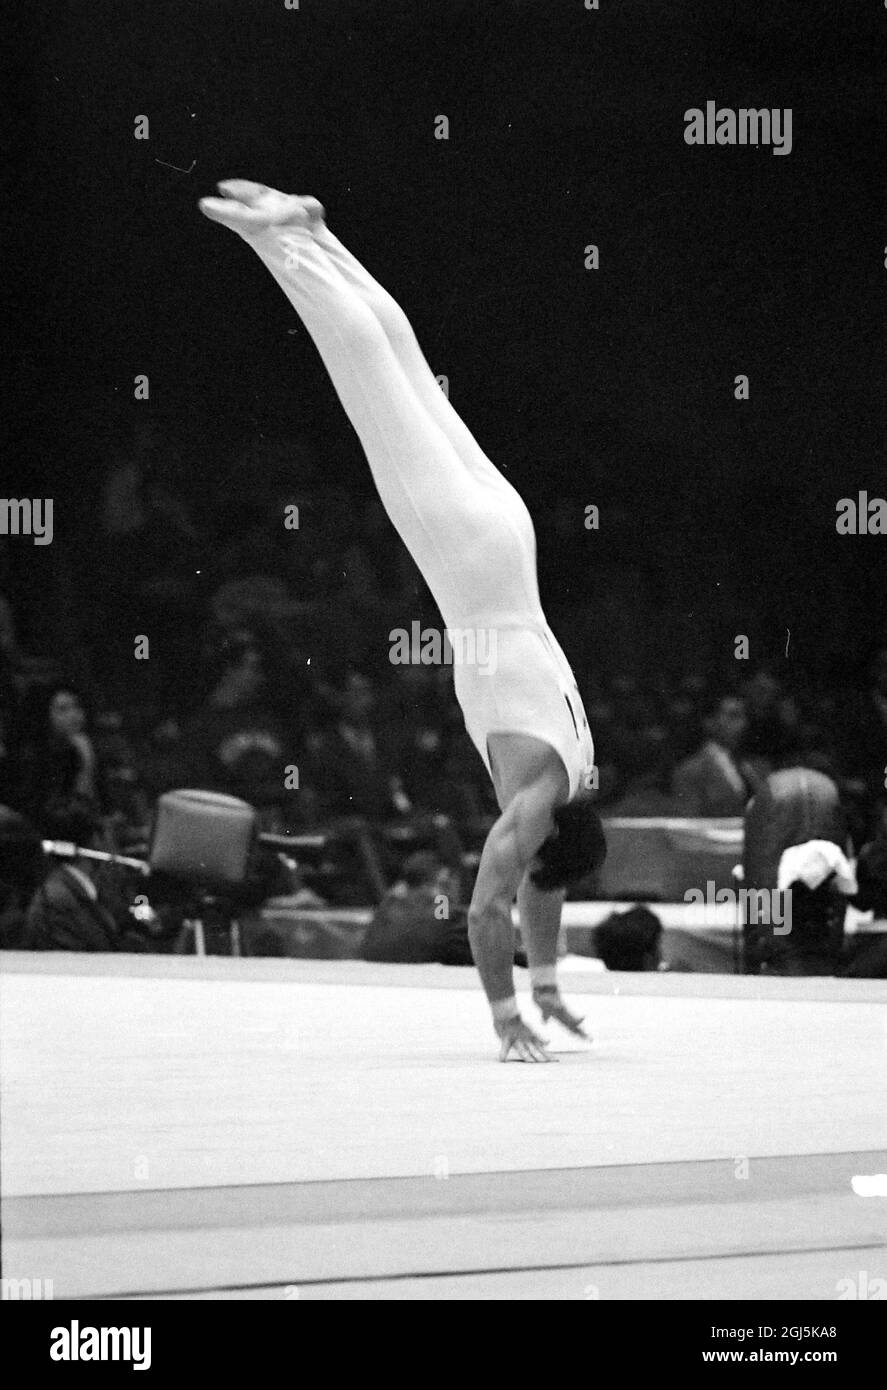 OLYMPICS, OLYMPIC SPORT GAMES - THE XVIII 18TH OLYMPIAD IN TOKYO, JAPAN - CZECH GYMNAST K KLECKA IN ACTION ; 22 OCTOBER 1964 Stock Photo